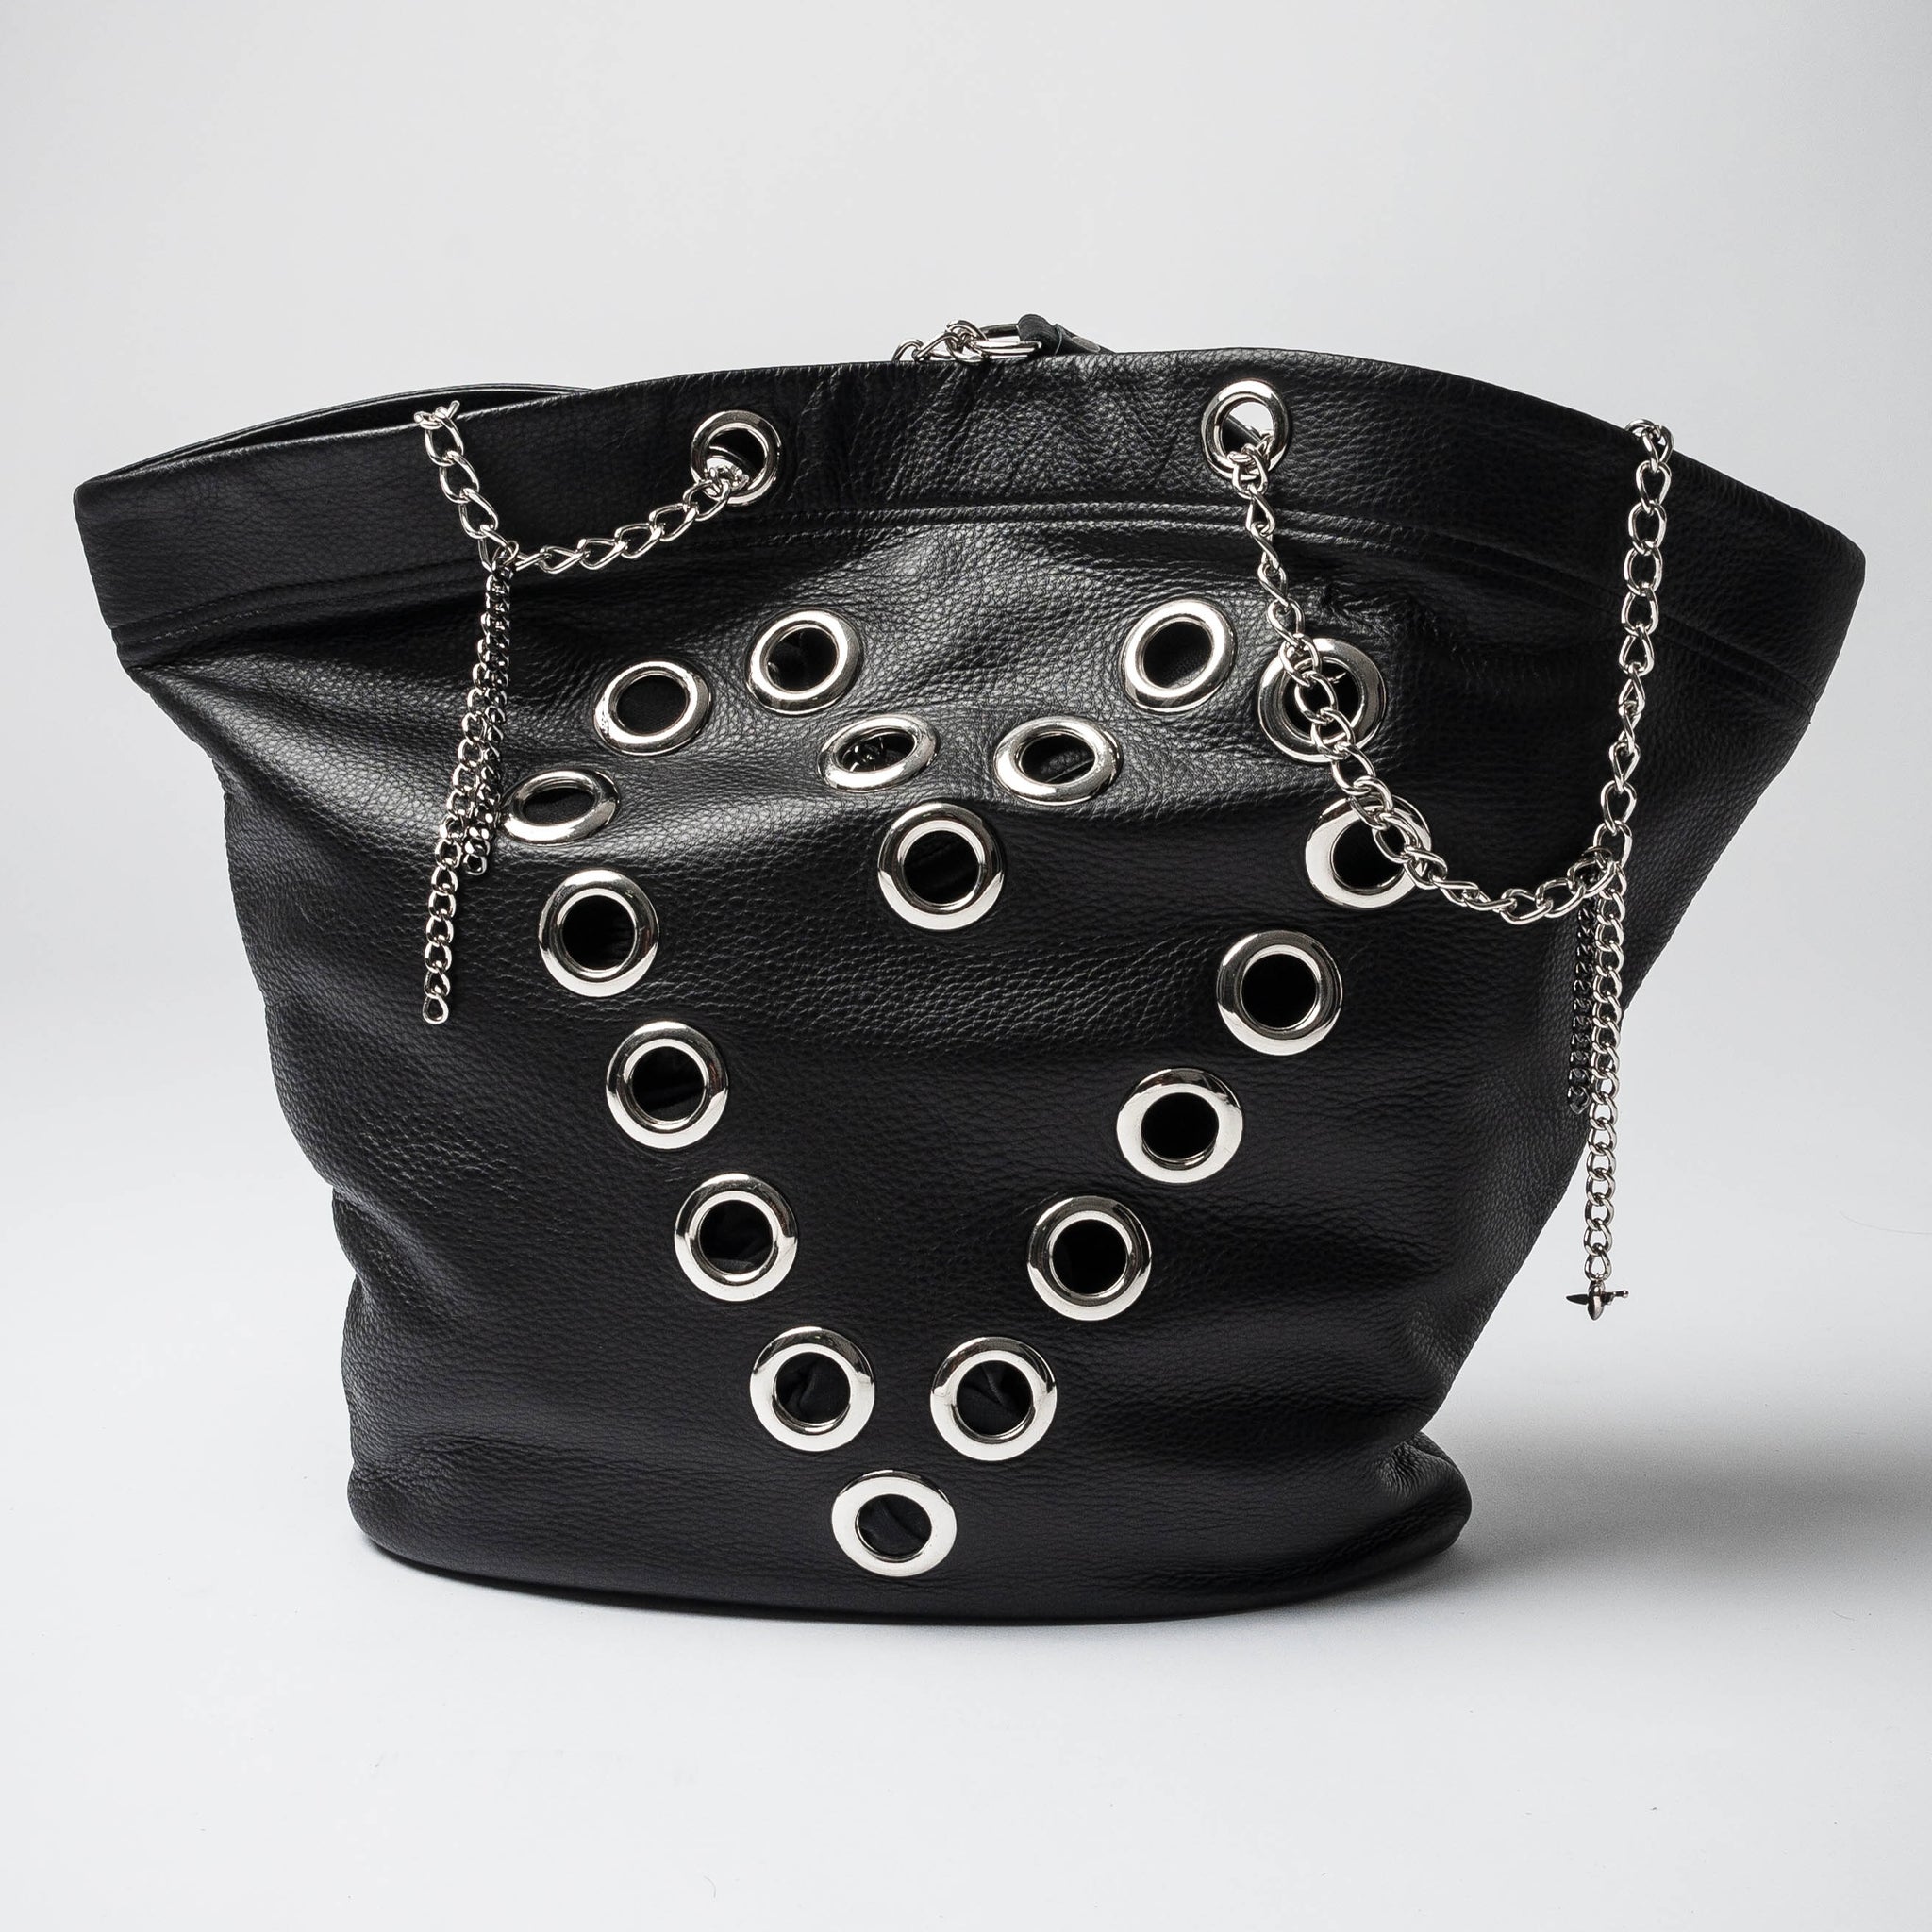 Heartbreak tote bag with metal chain